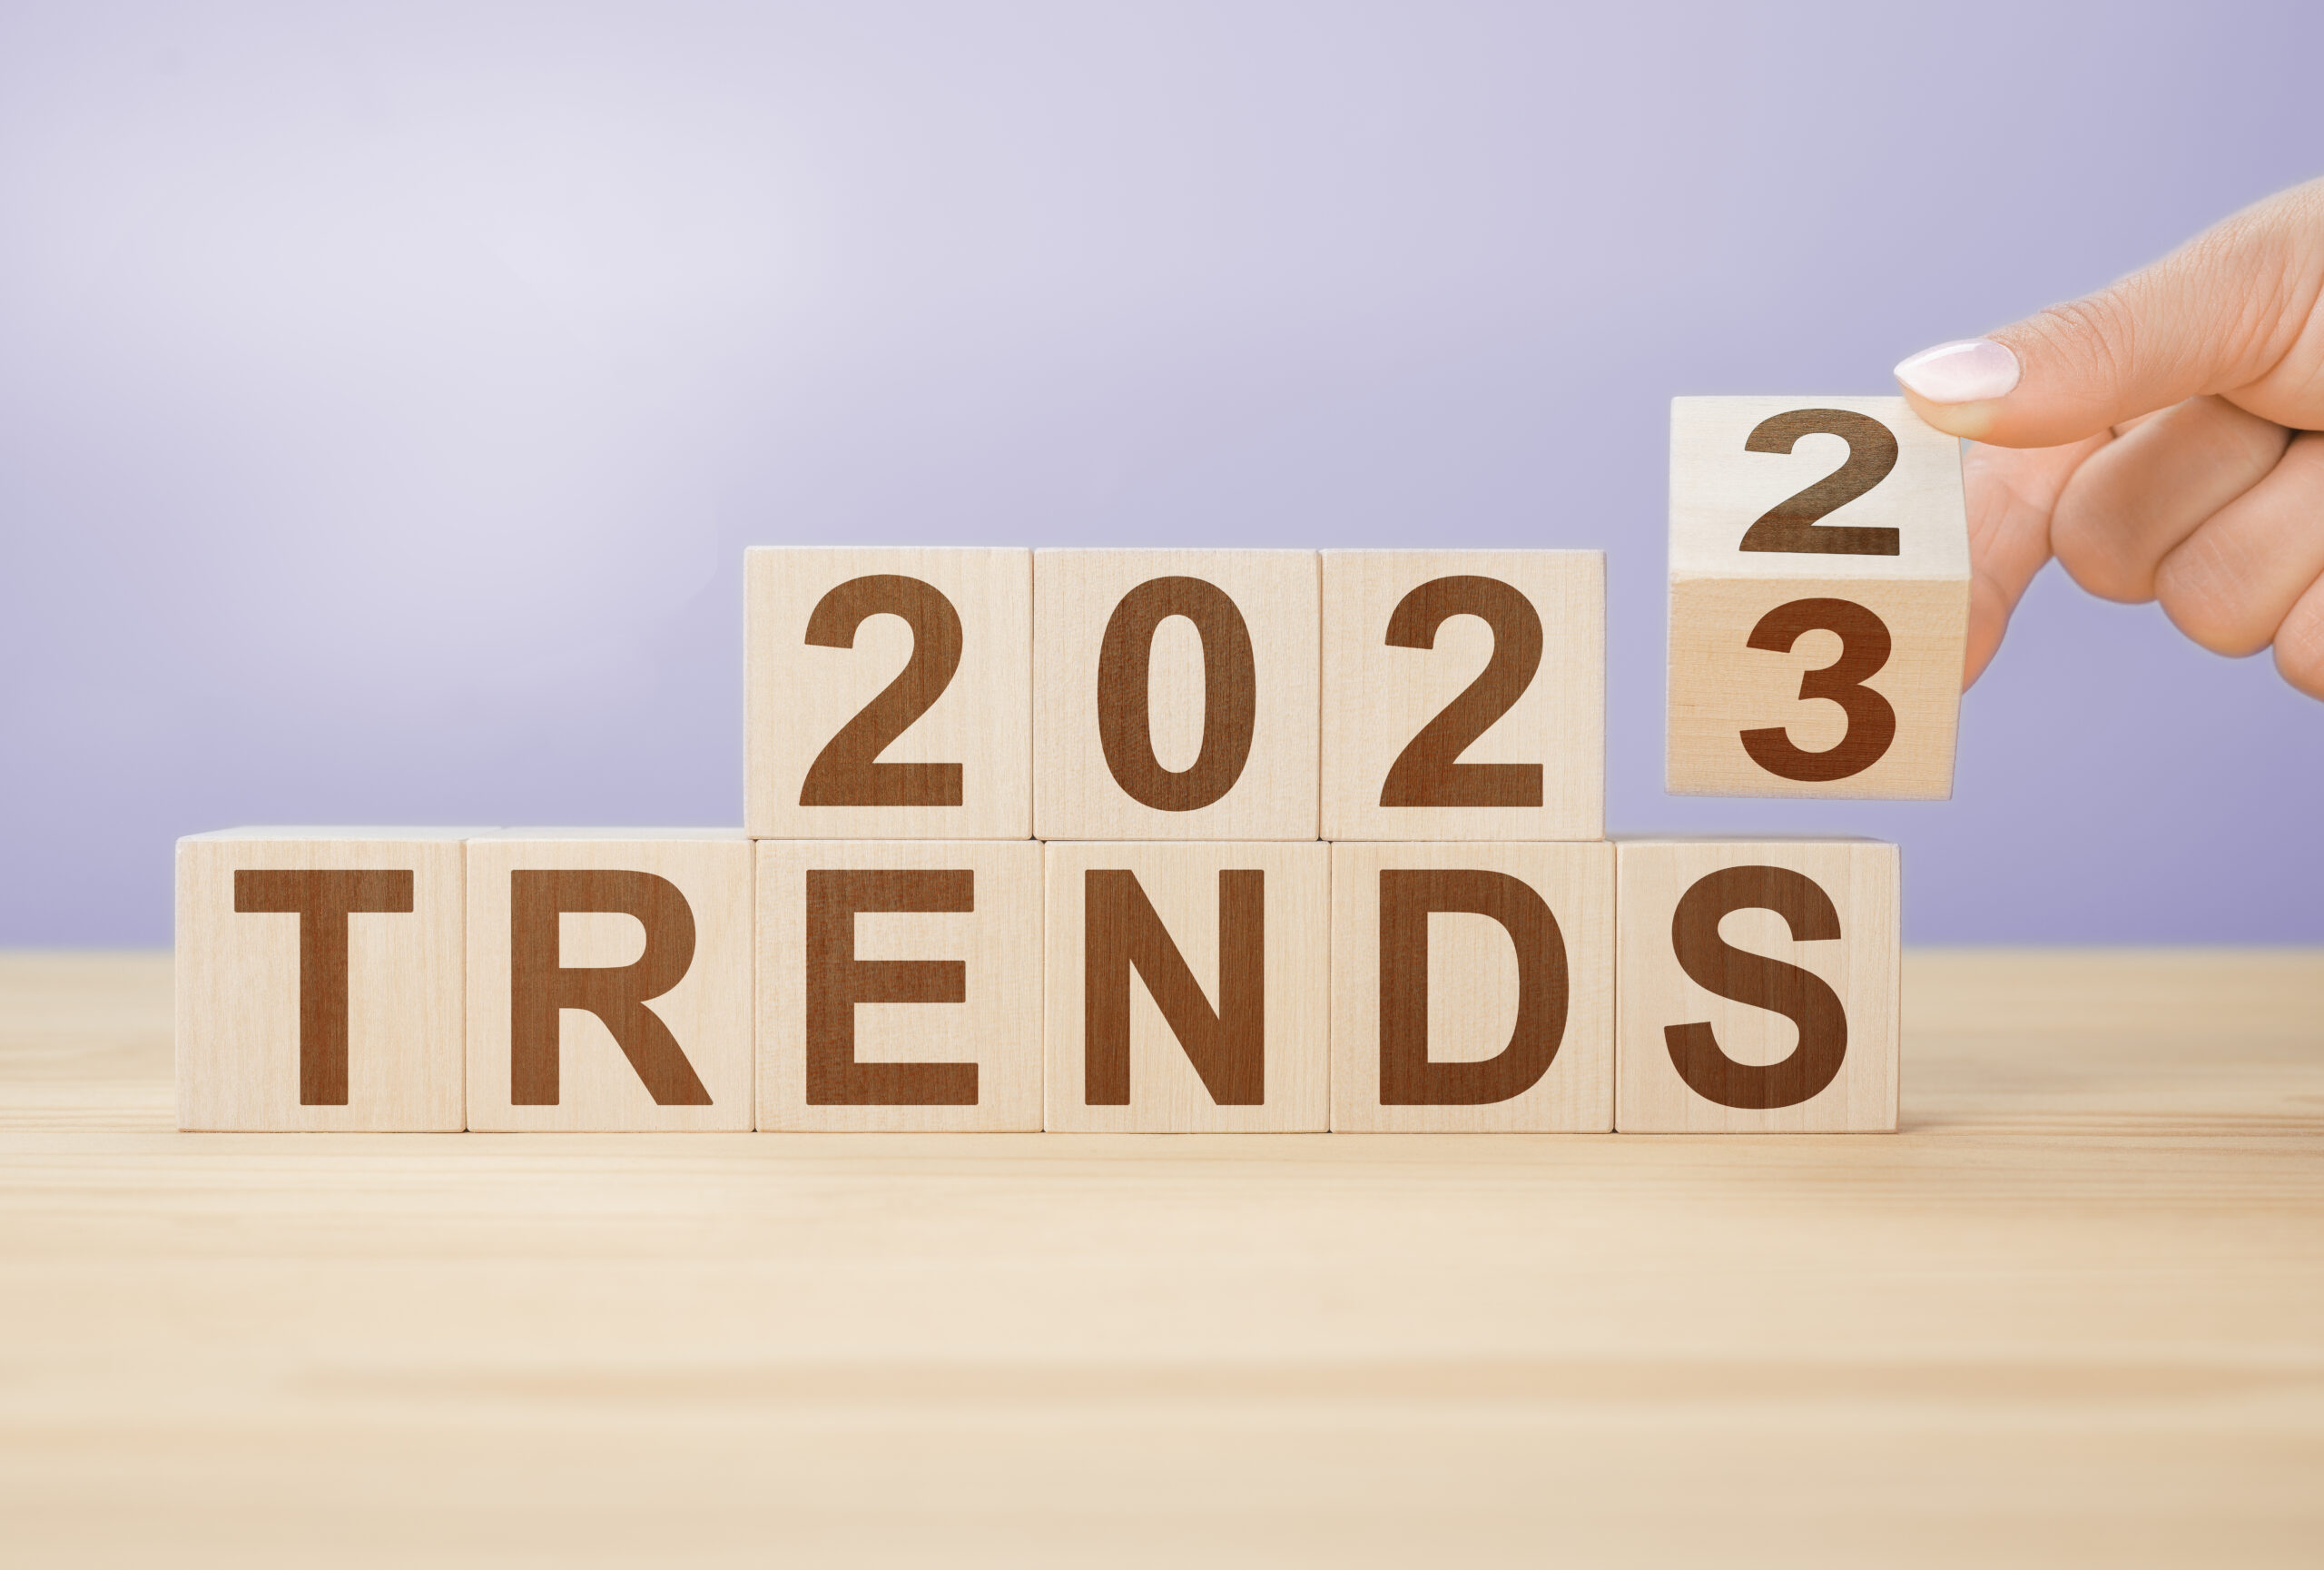 Businesswoman turns wooden cube and changes words 2022 to 20223 on very peri color background. Flipping of wooden cube block for change 2022 to 2023 year